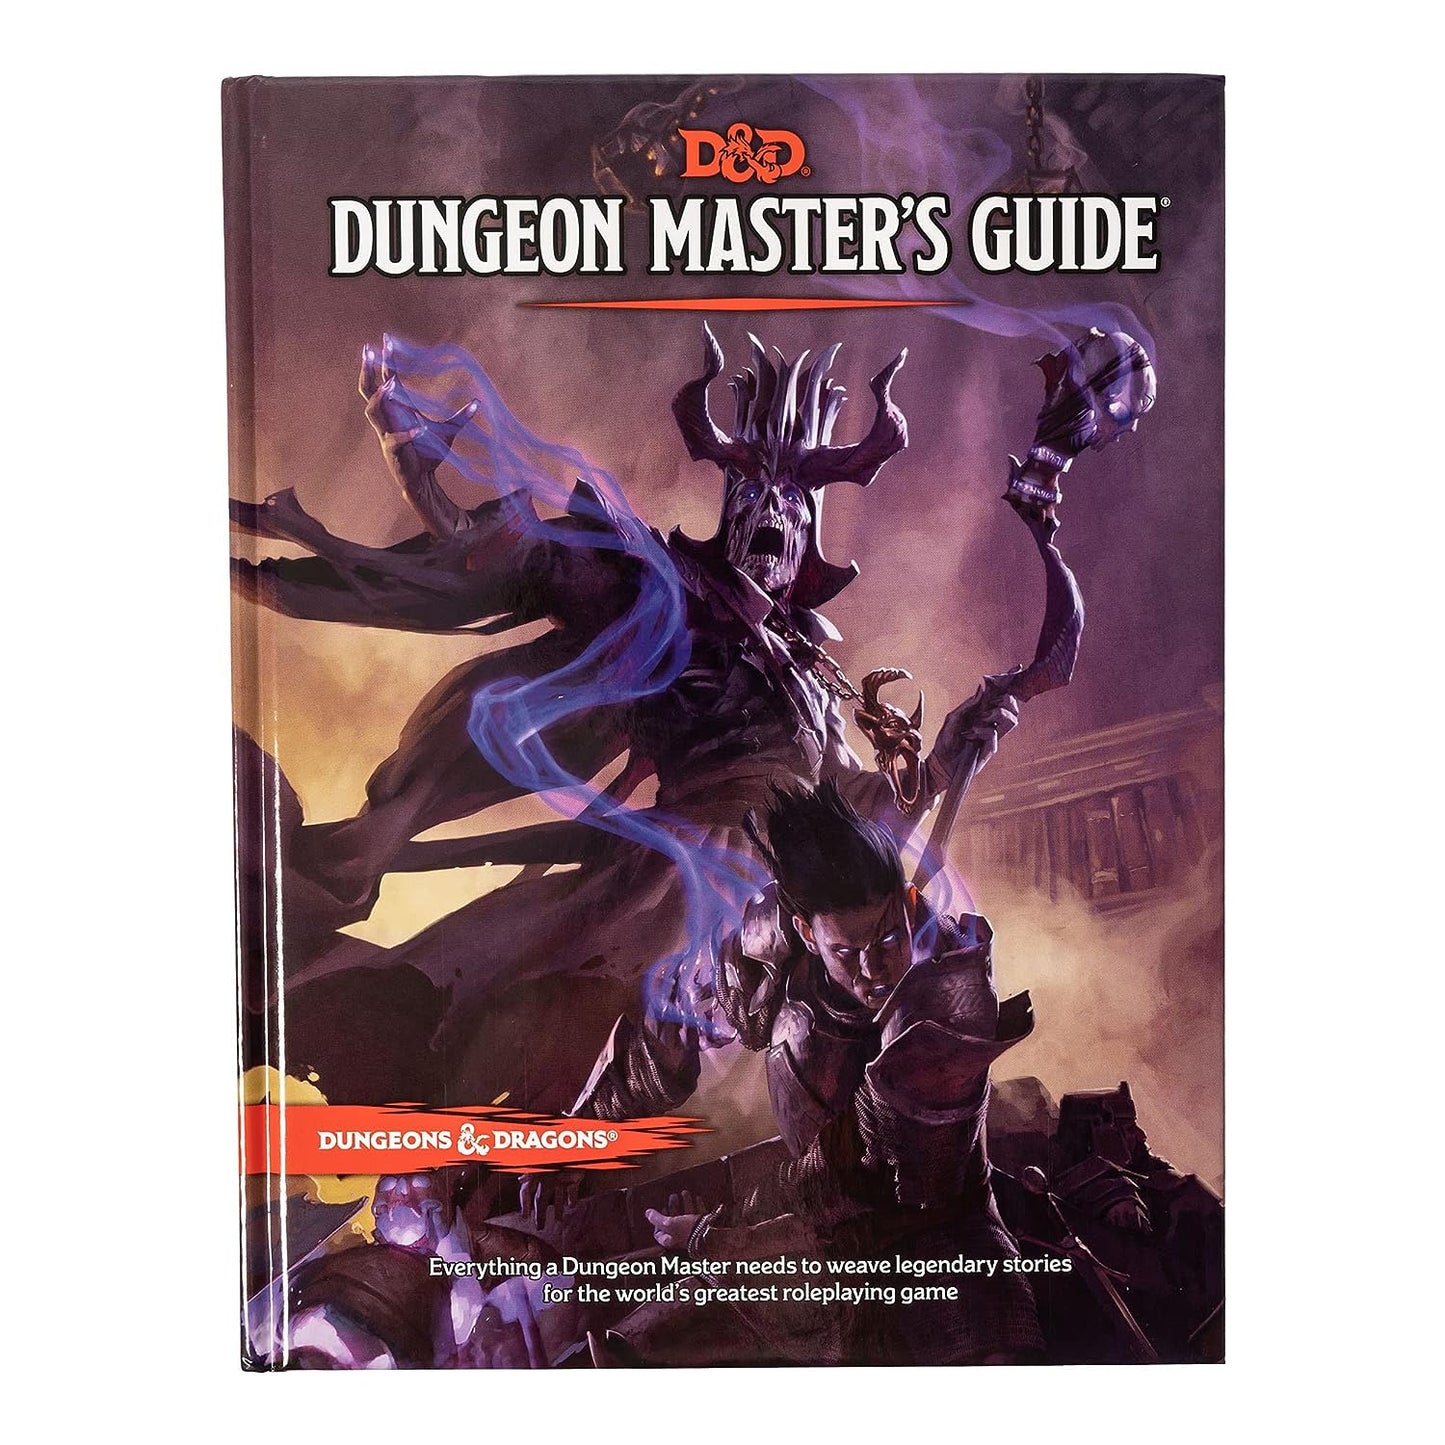 D&D - Dungeon Master's Guide